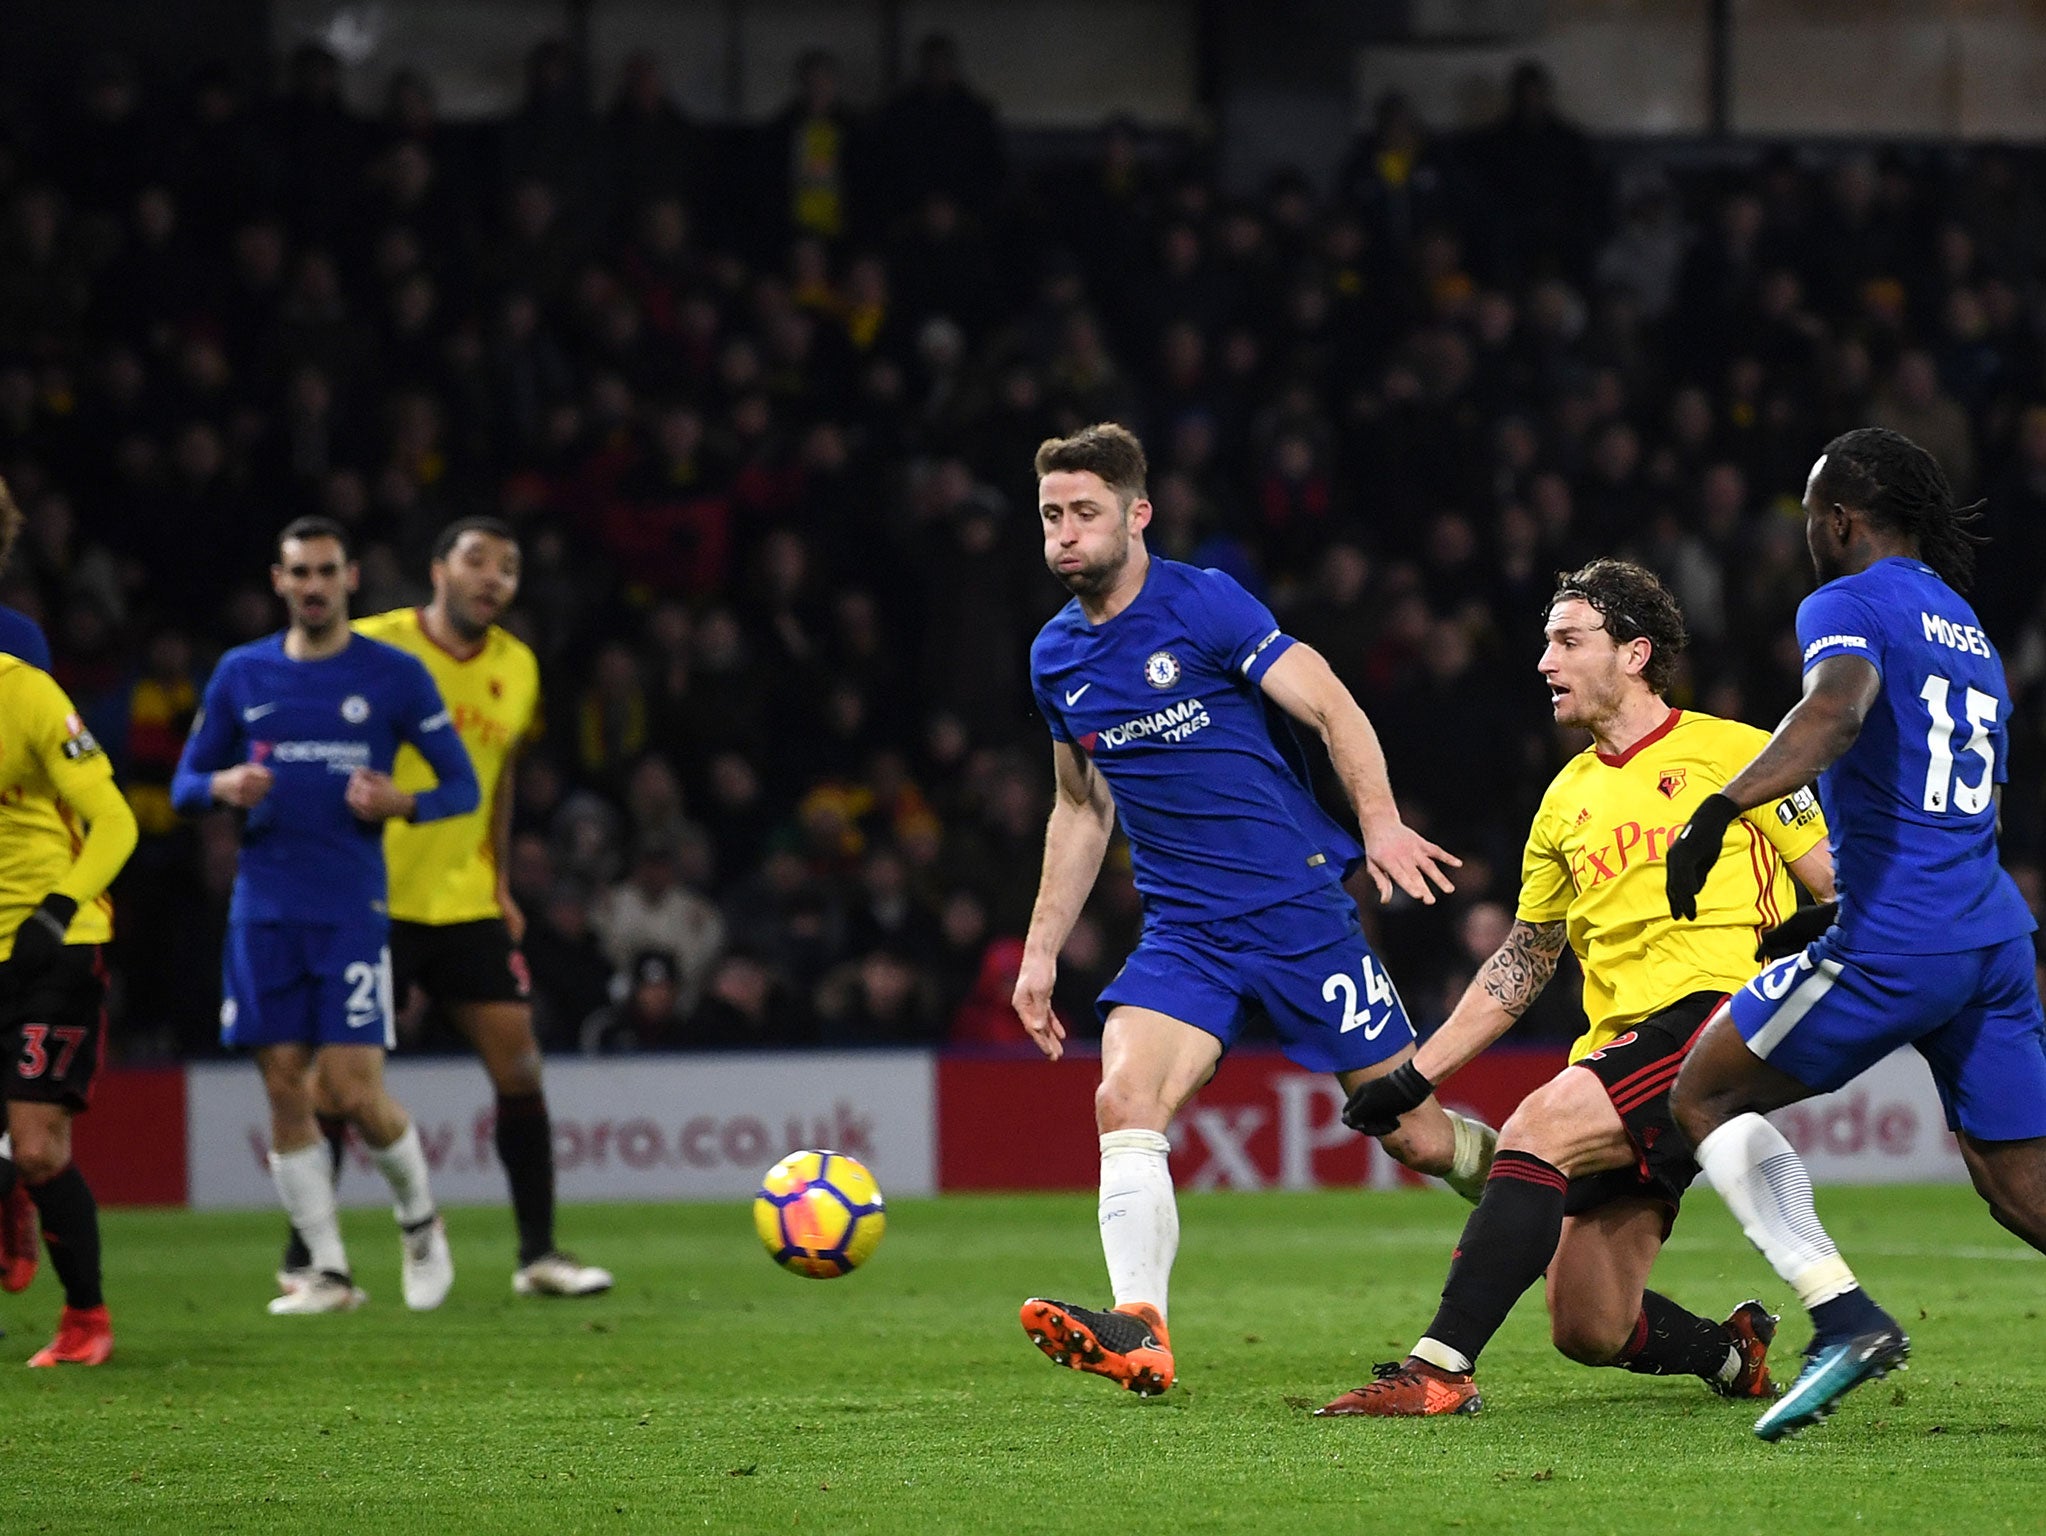 Daryl Janmaat's well-worked goal opened the floodgates at Vicarage Road